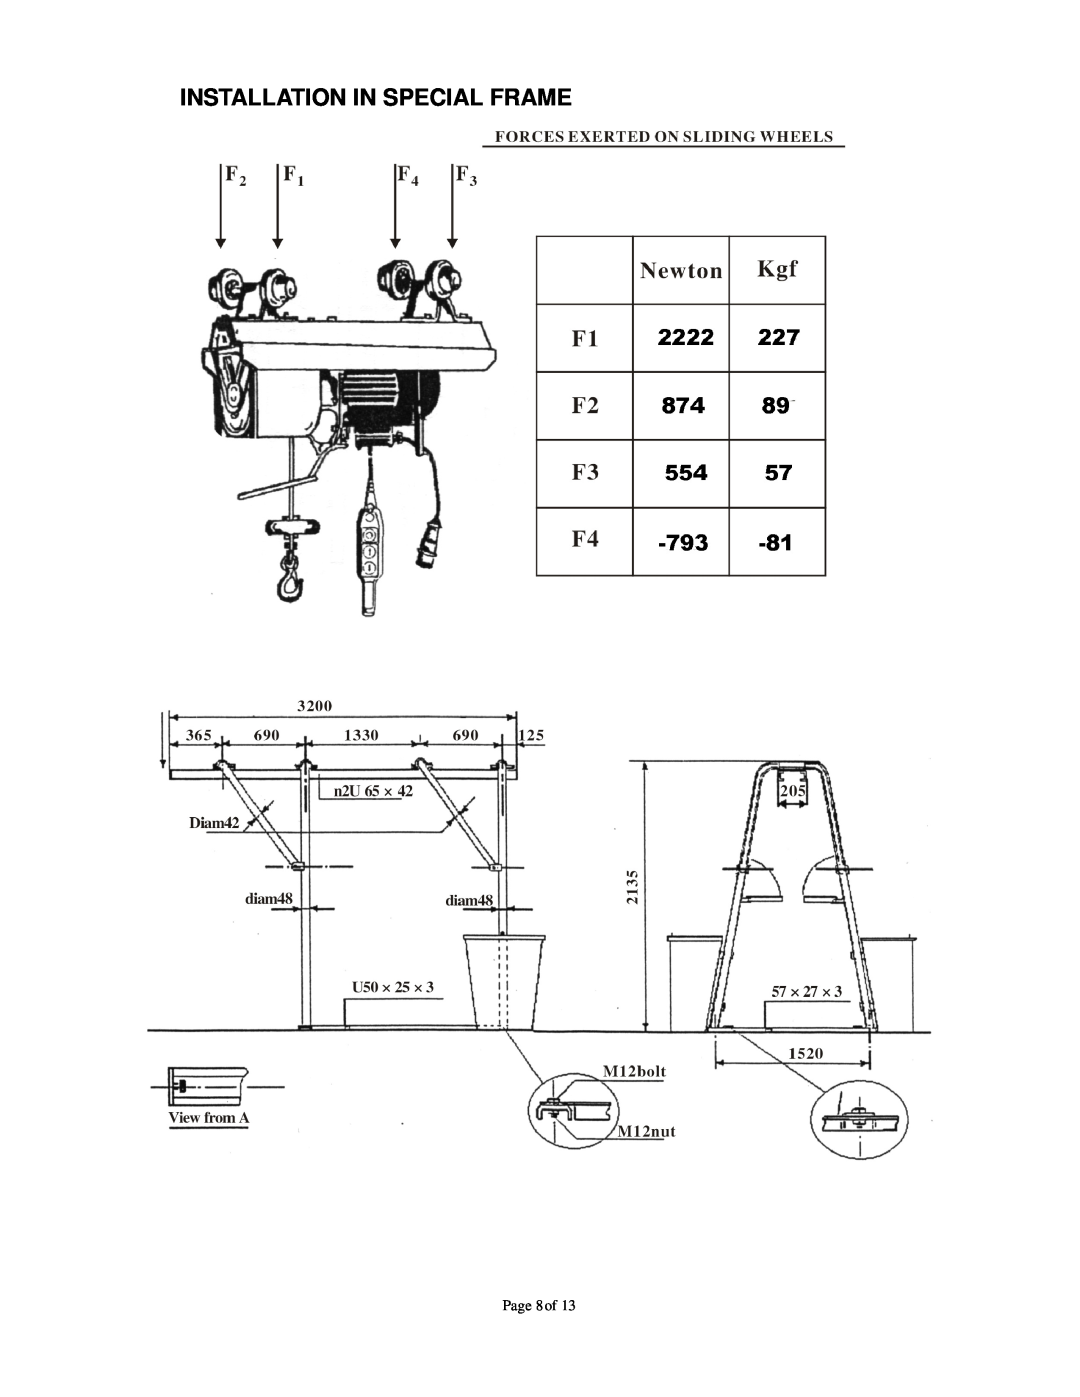 Northern Industrial Tools 142264 owner manual Installation In Special Frame, Page 8 of 